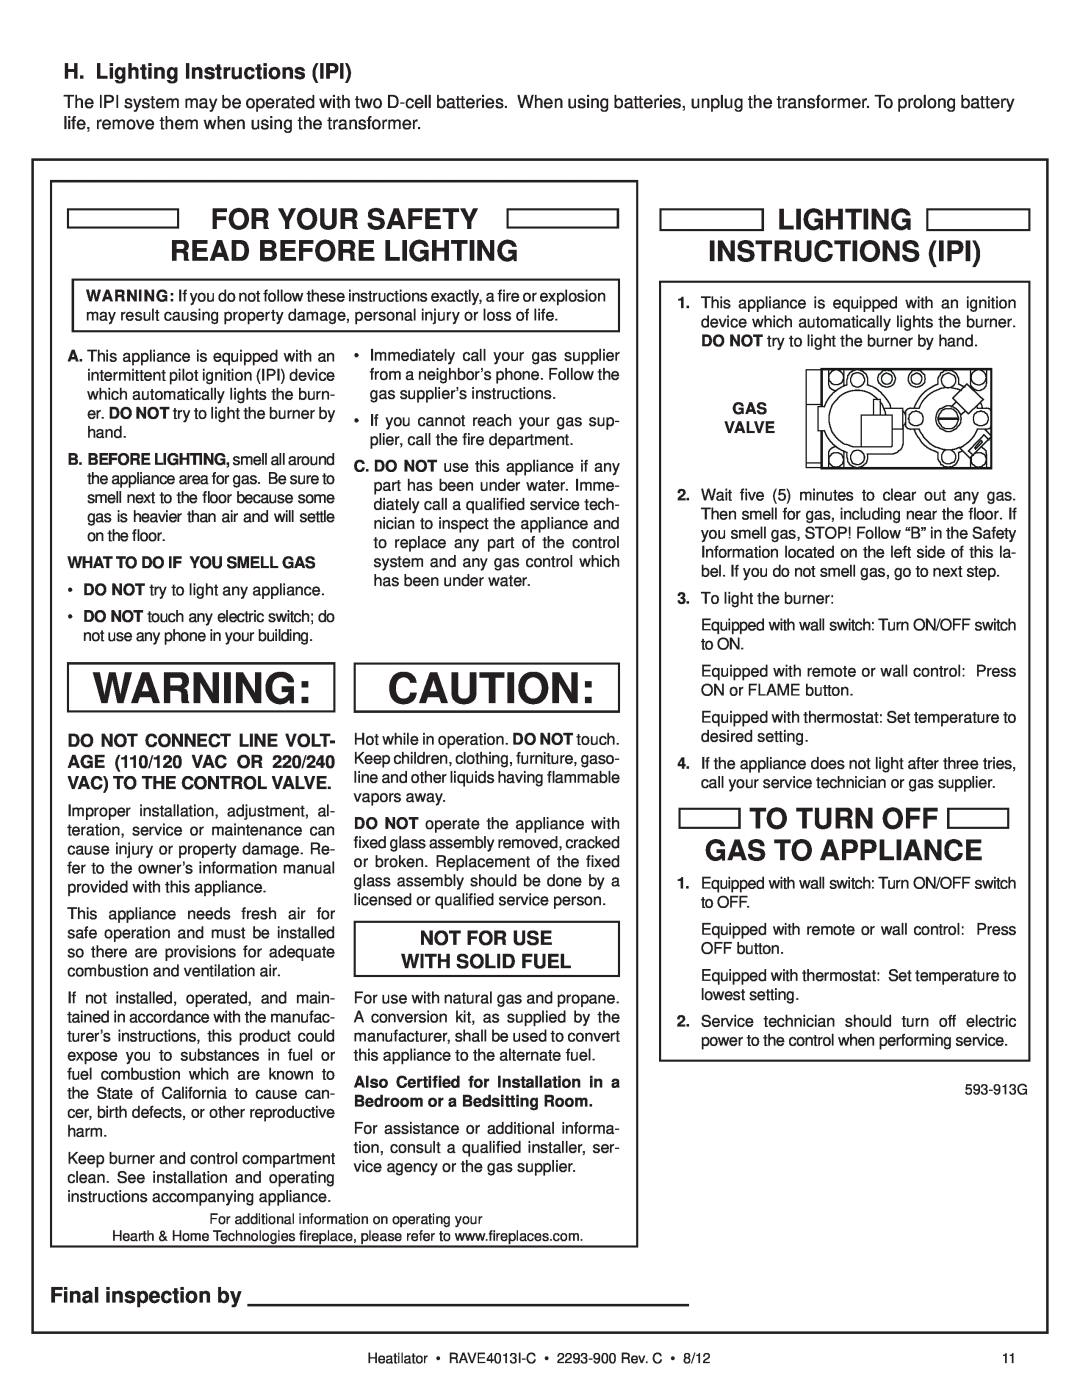 Heatiator Rave4013i-c H. Lighting Instructions IPI, Final inspection by, For Your Safety Read Before Lighting, Gas Valve 